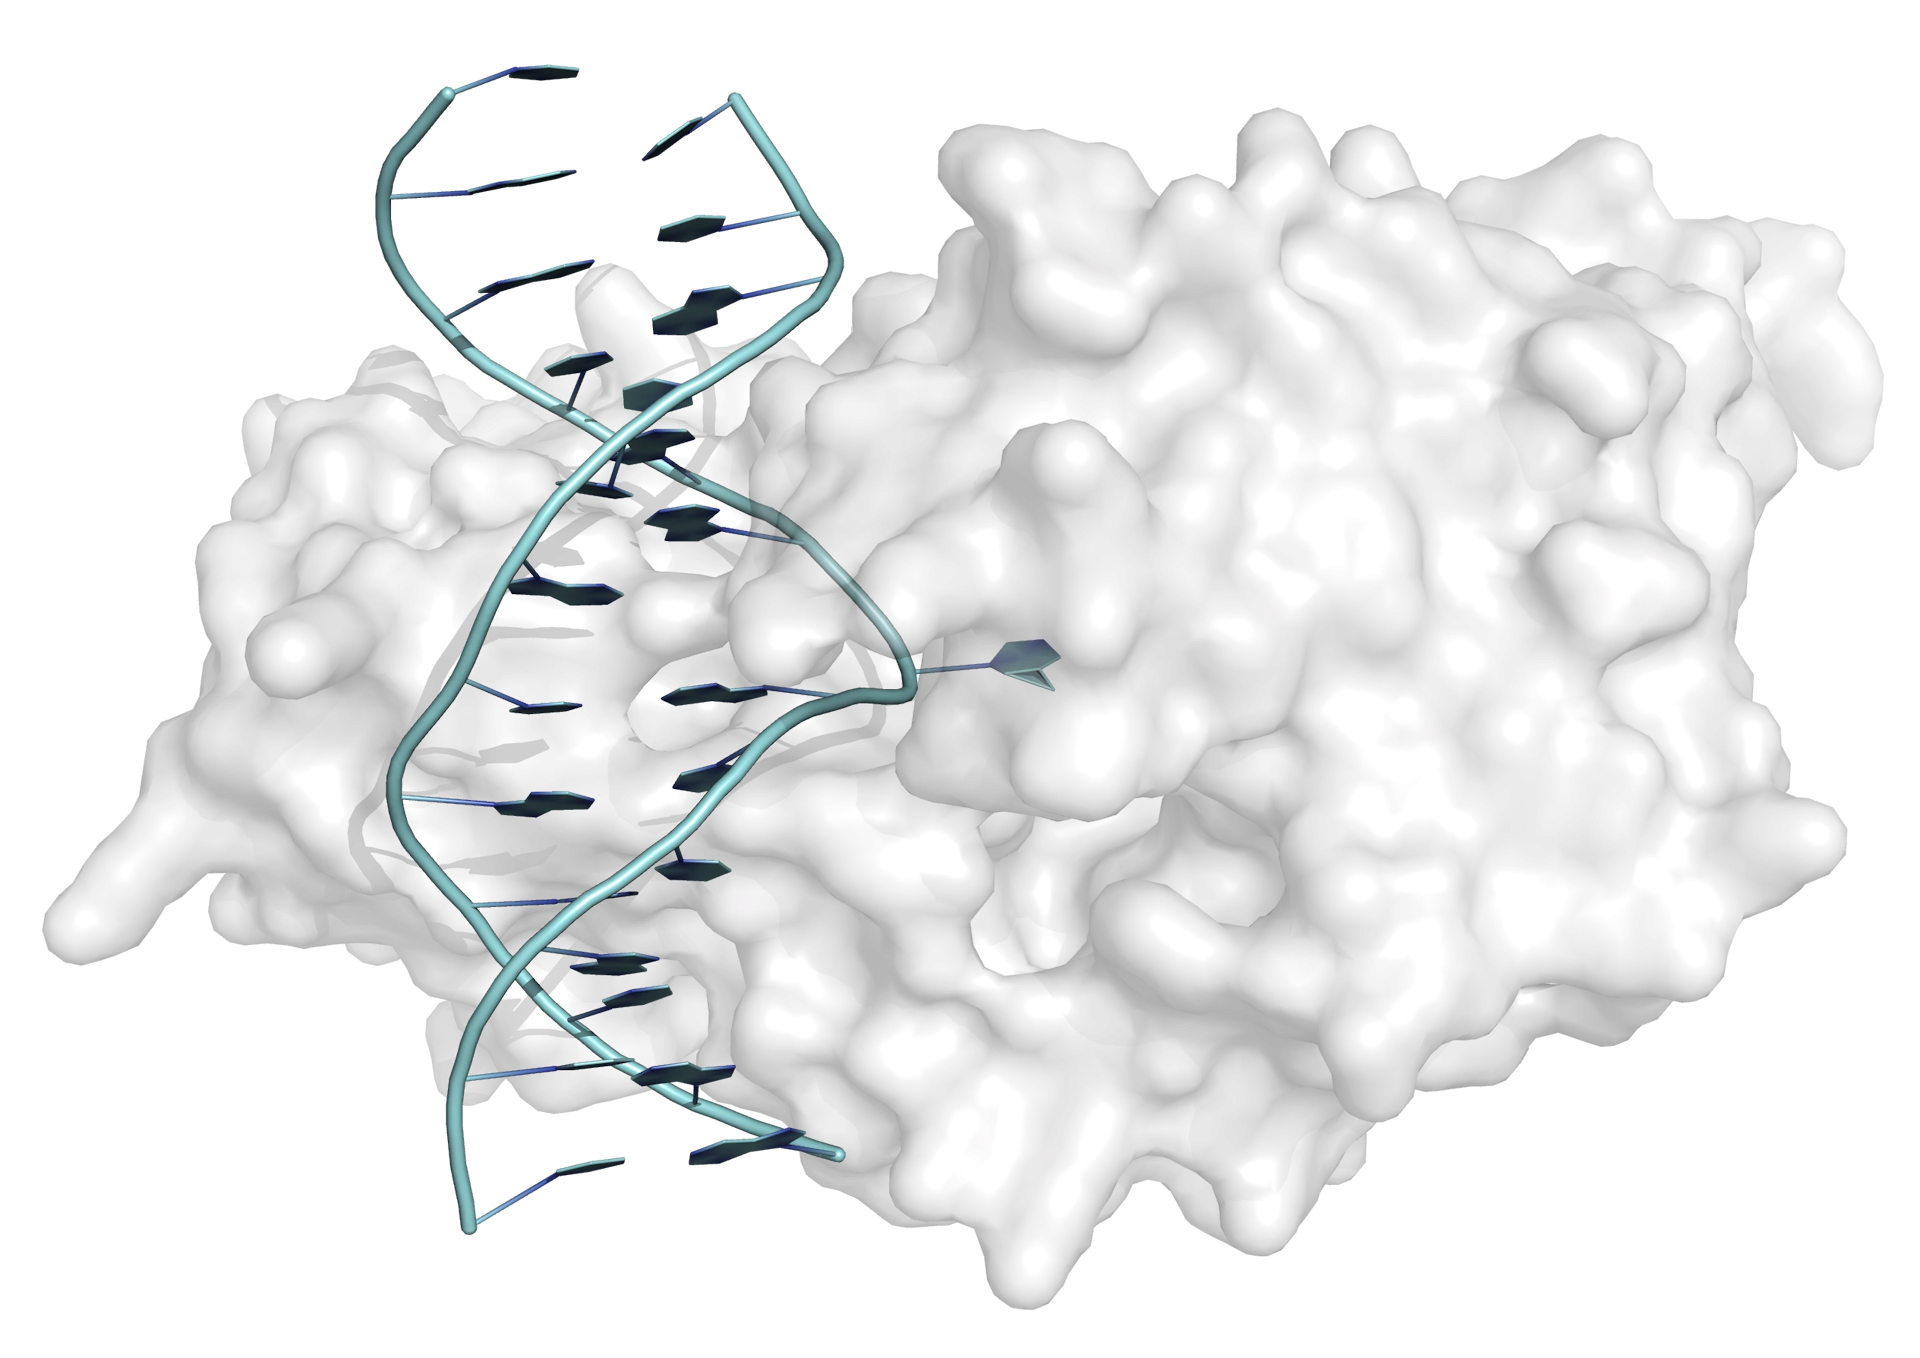 The crystal structure of the complex between the methyltransferase from Hha I and double-stranded DNA (blue) shows that one base (orange) is flipped out of the double helix, and binds in the enzyme's active site.